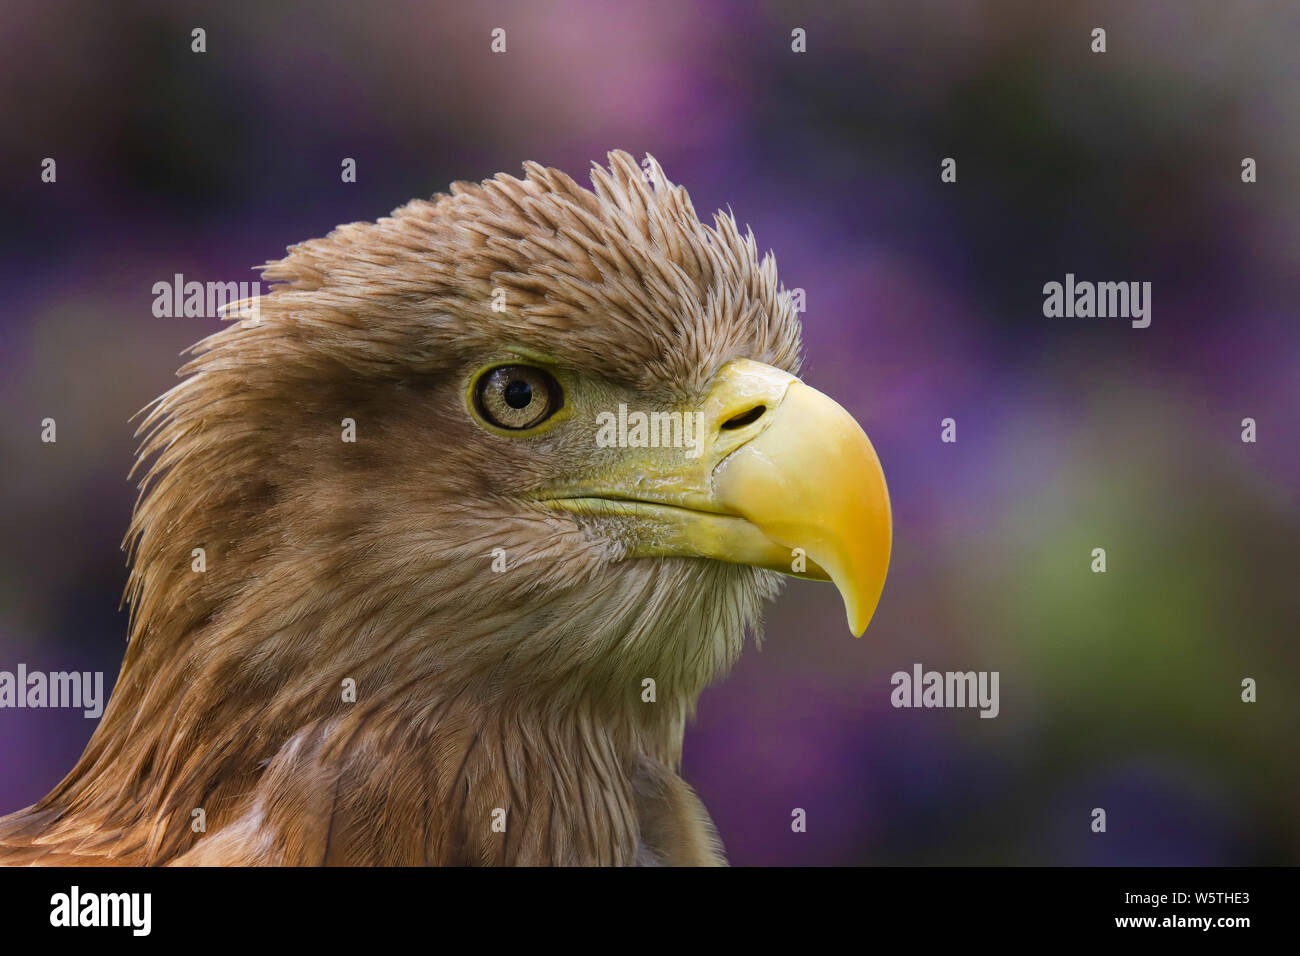 Close up head and shoulders of a magnificent White Tailed Sea Eagle (Haliaeetus albicilla) bird of prey Stock Photo